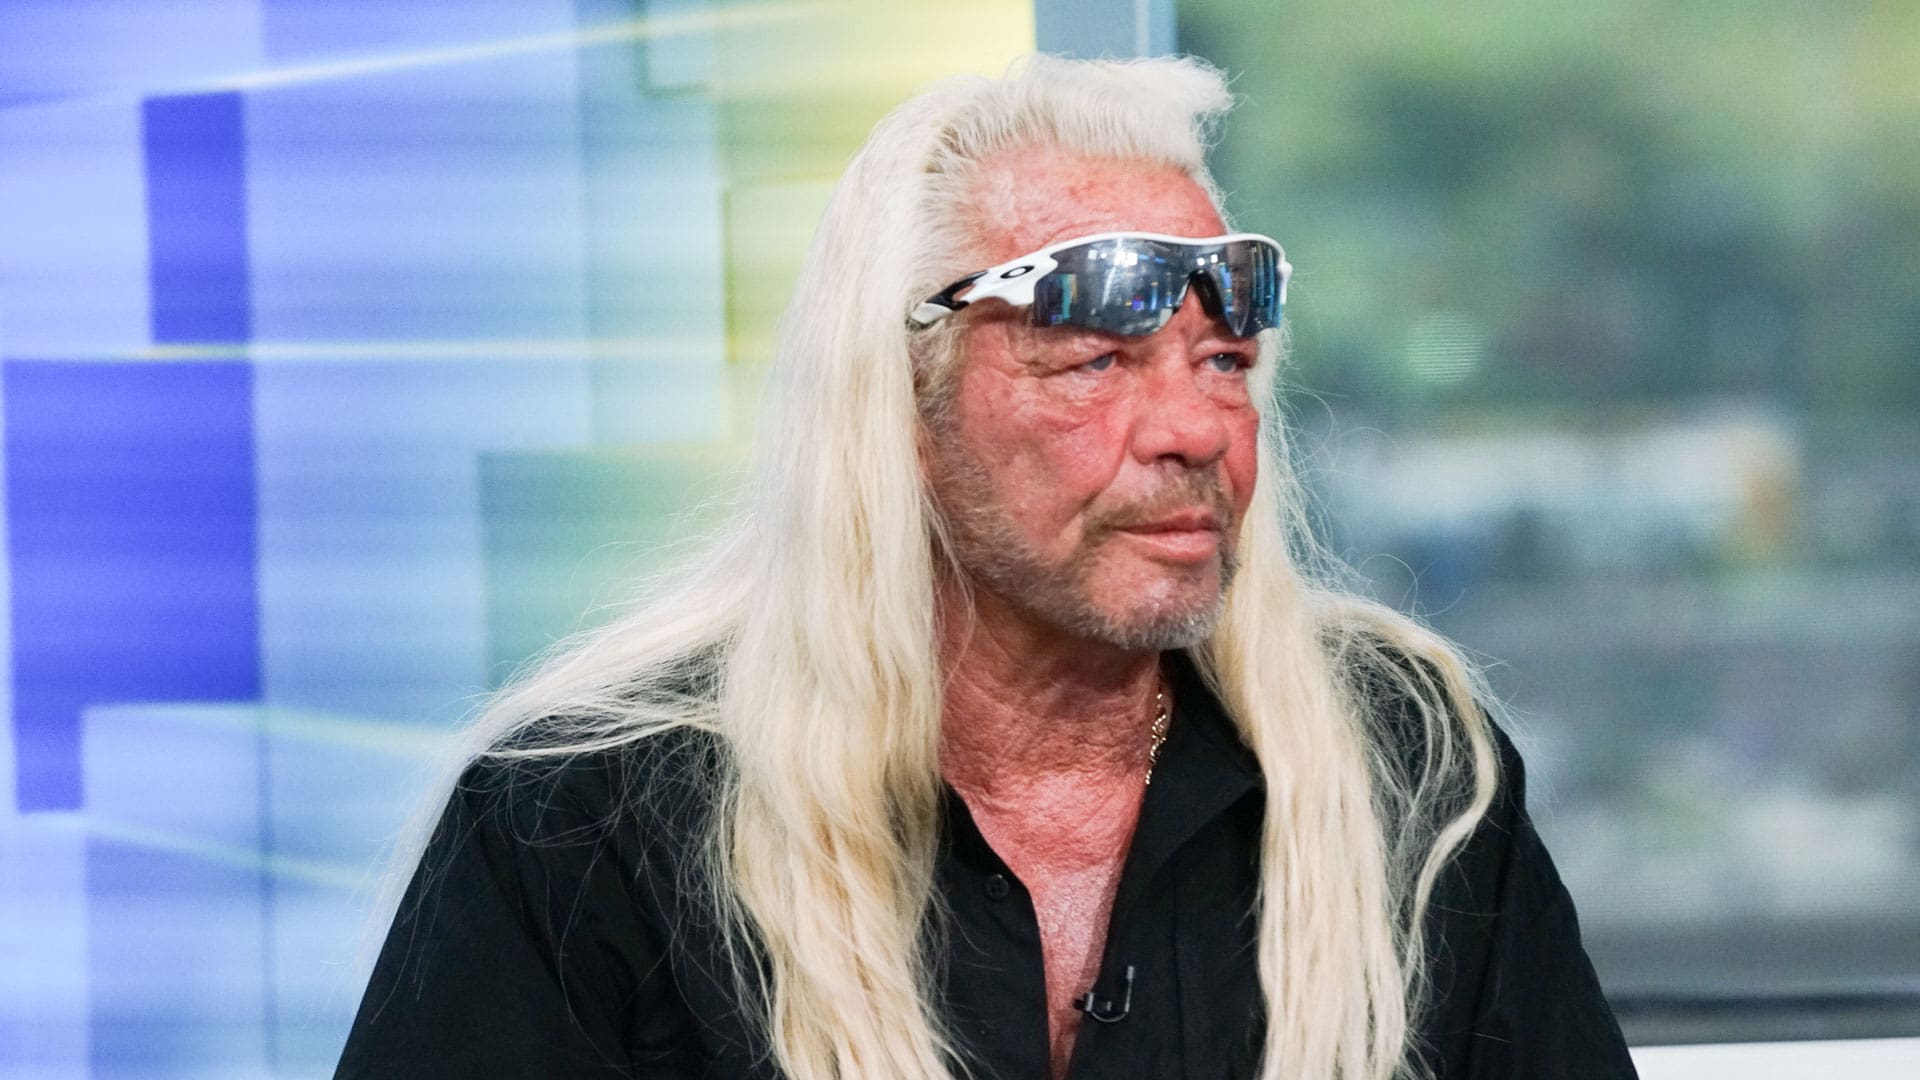 ”dog-the-bounty-hunter-explains-why-new-girlfriend-replaced-dead-wife-beth-chapmans-clothes-with-her-own”